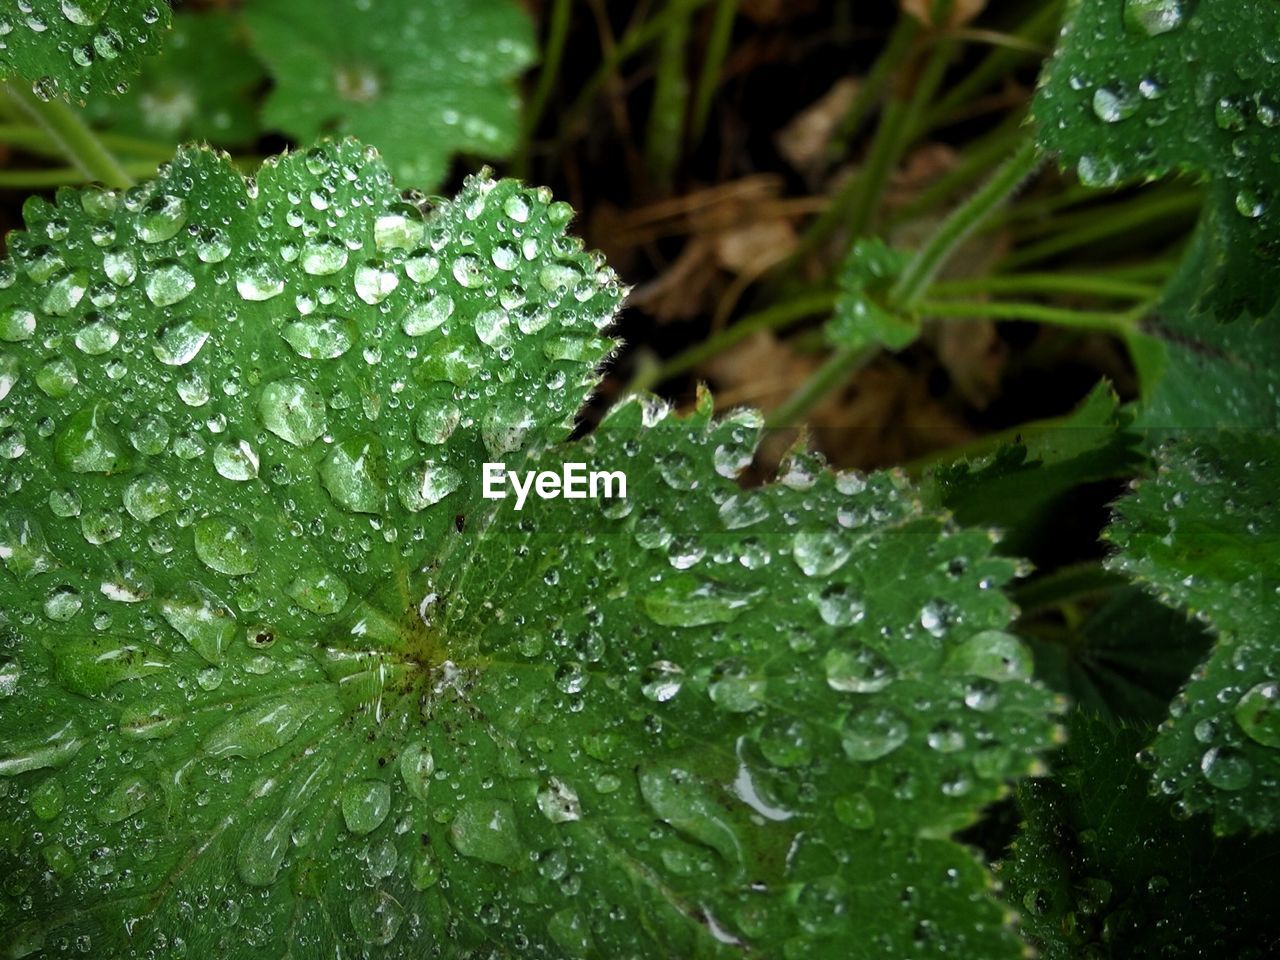 Close-up of wet plant during monsoon